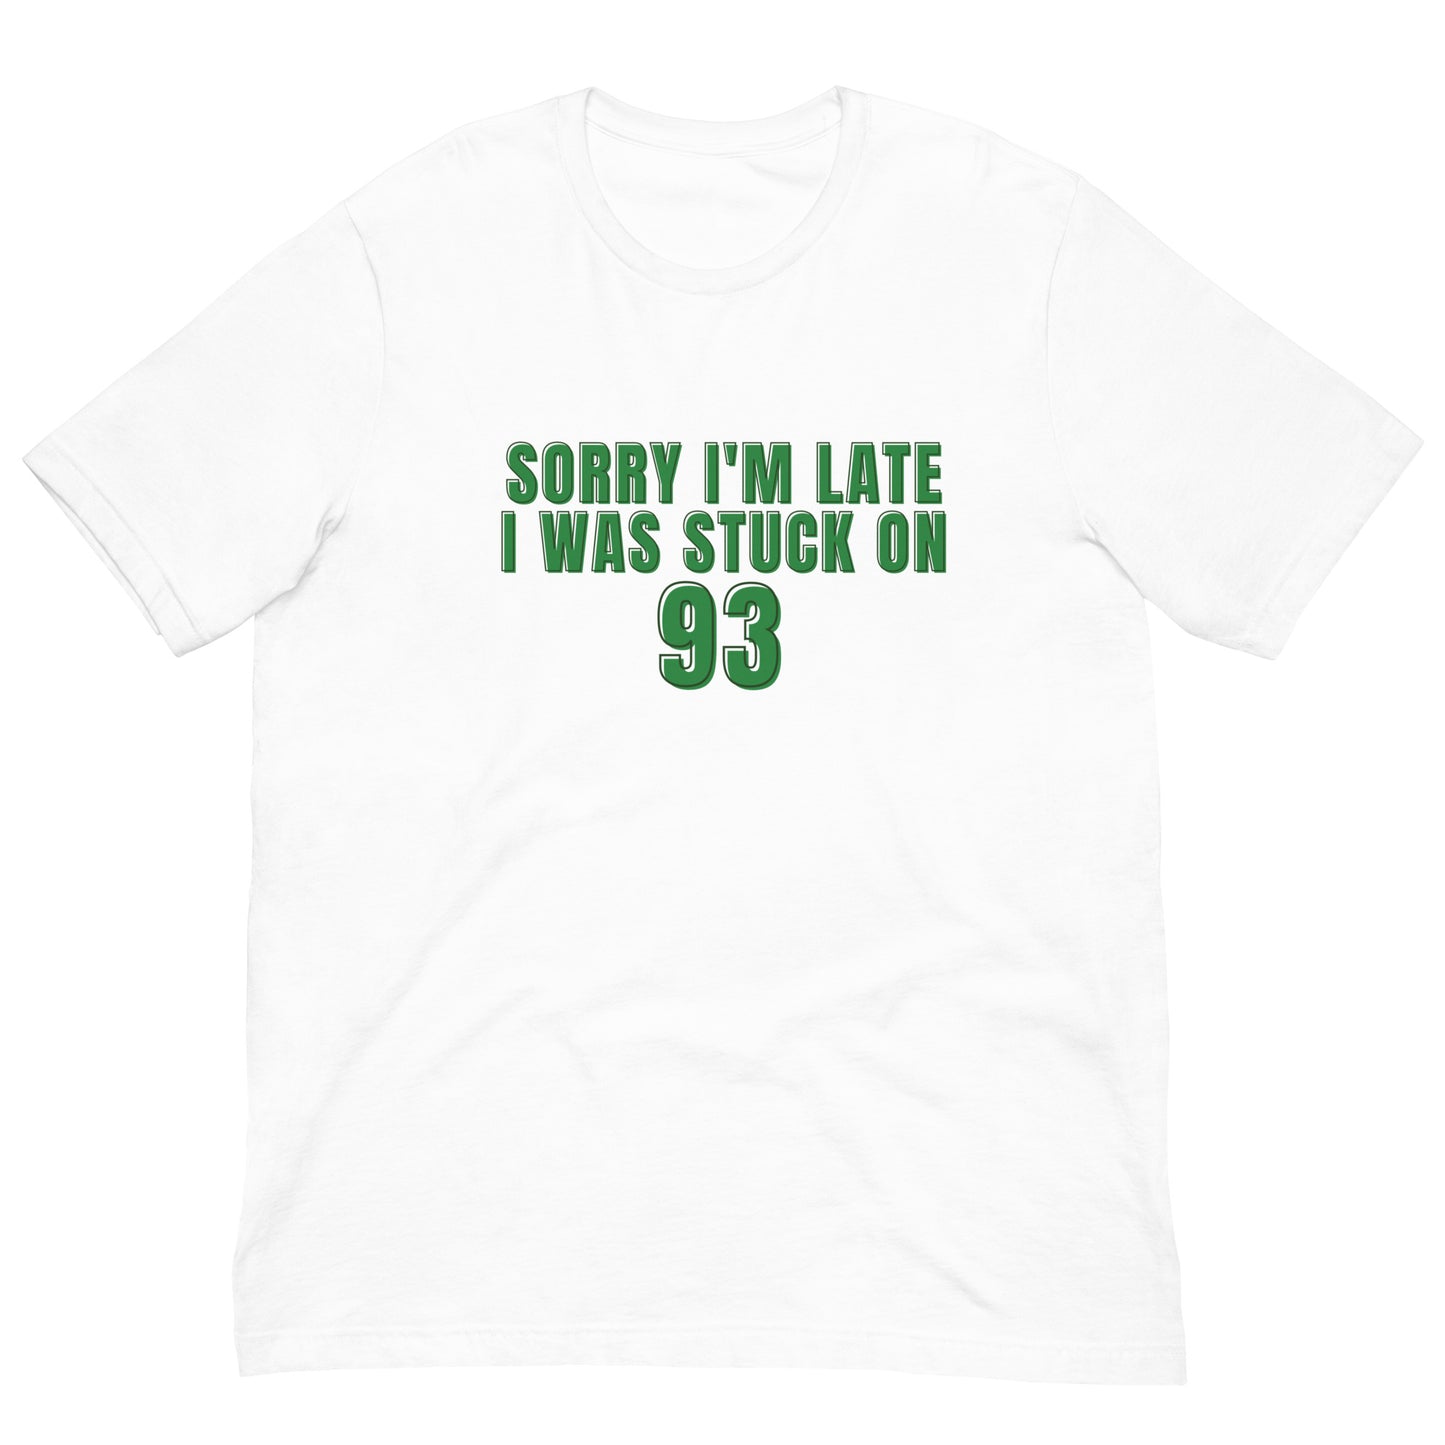 white tshirt that says "sorry i'm late i was stuck on 93" in green lettering